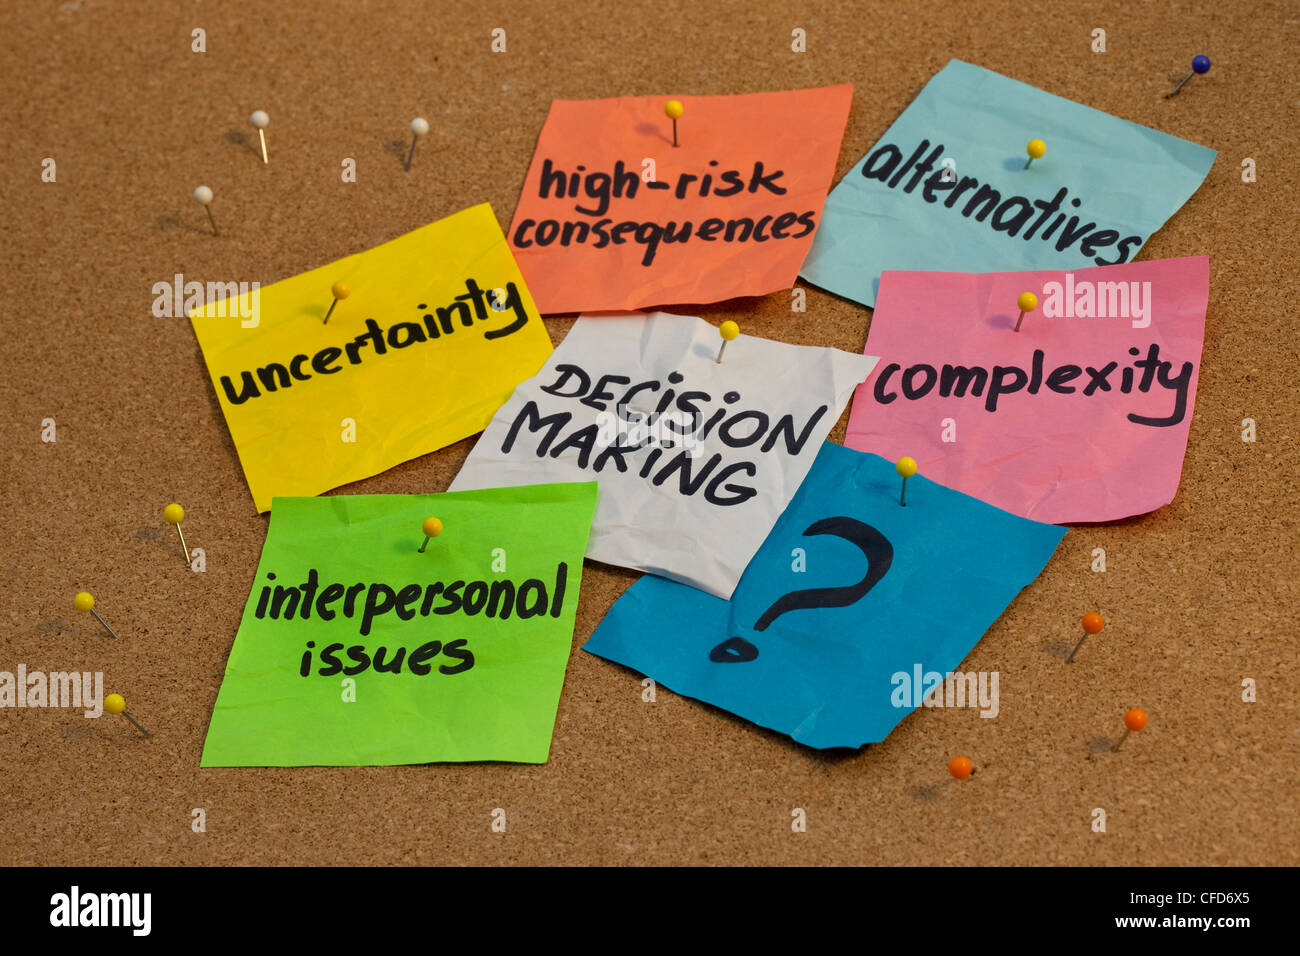 problems in decision making process - uncertainty, alternatives, risk consequences, complexity, personal issues Stock Photo